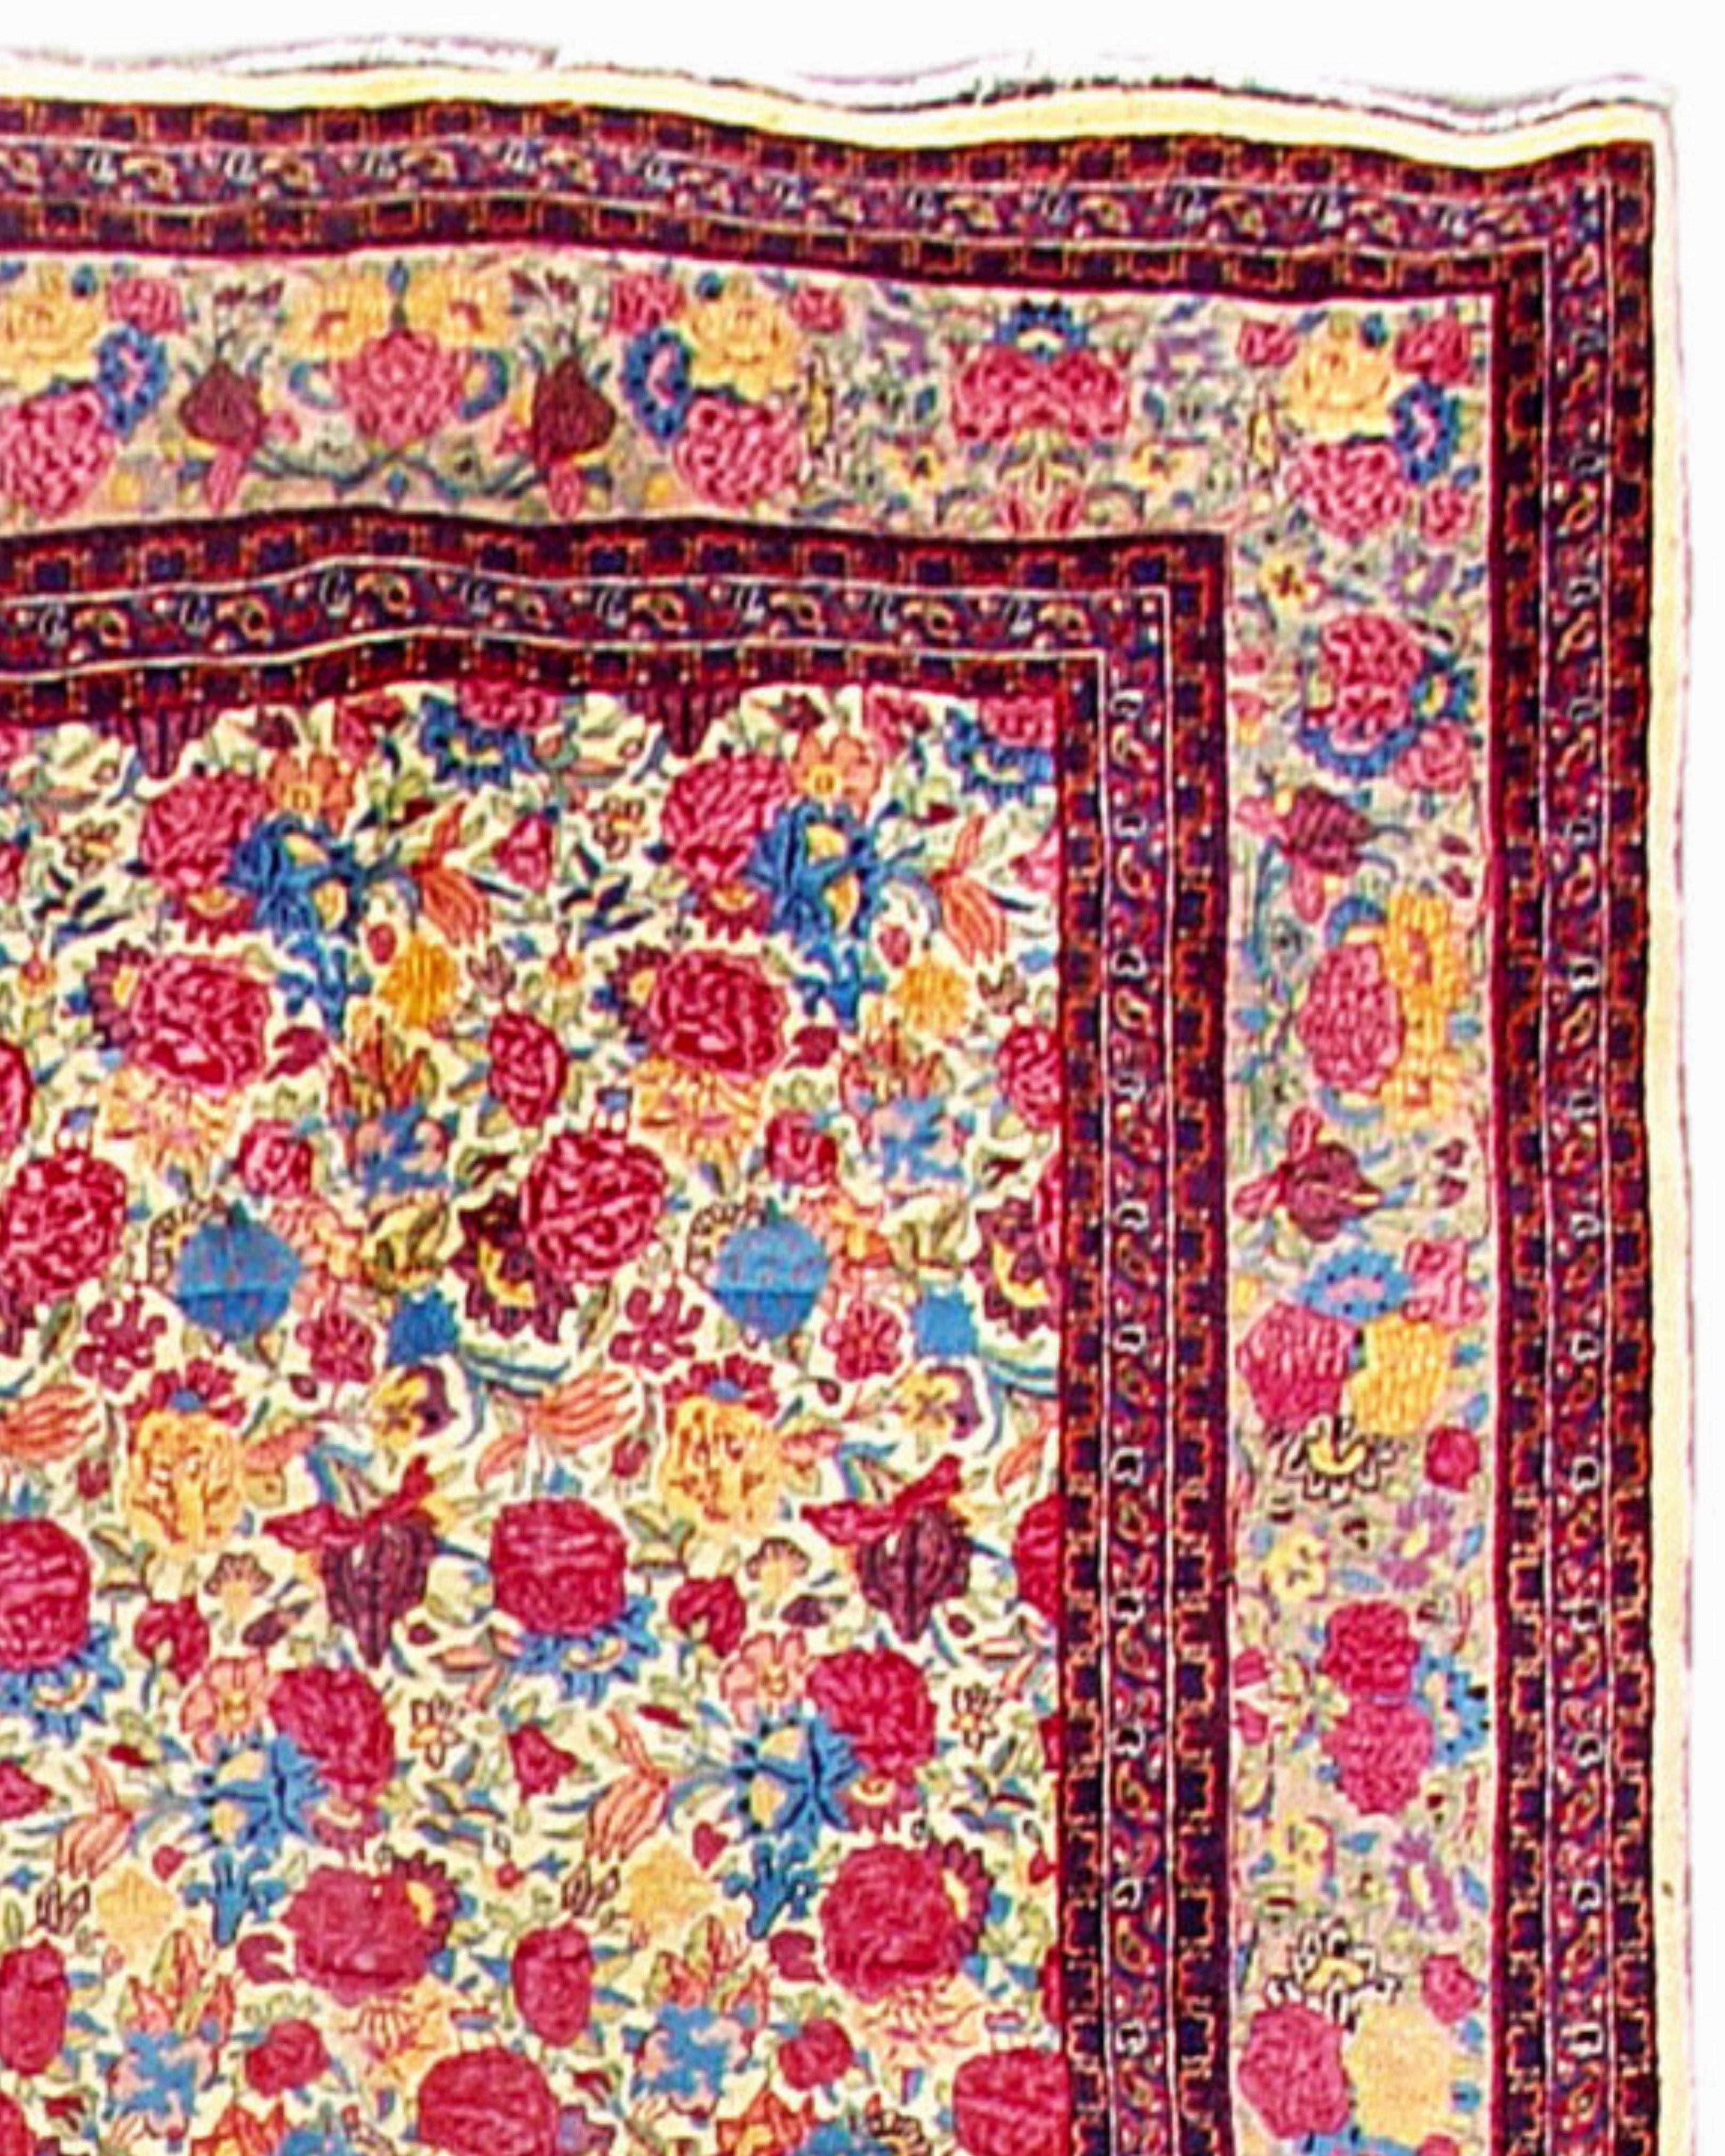 Antique Persian Mashad Carpet, 19th Century

Mashad is situated in the far northeast of Persia and is the largest city of the ancient province of Khorasan. Like other eastern Persian carpet weaving groups, Mashad carpets of the 19th and early 20th